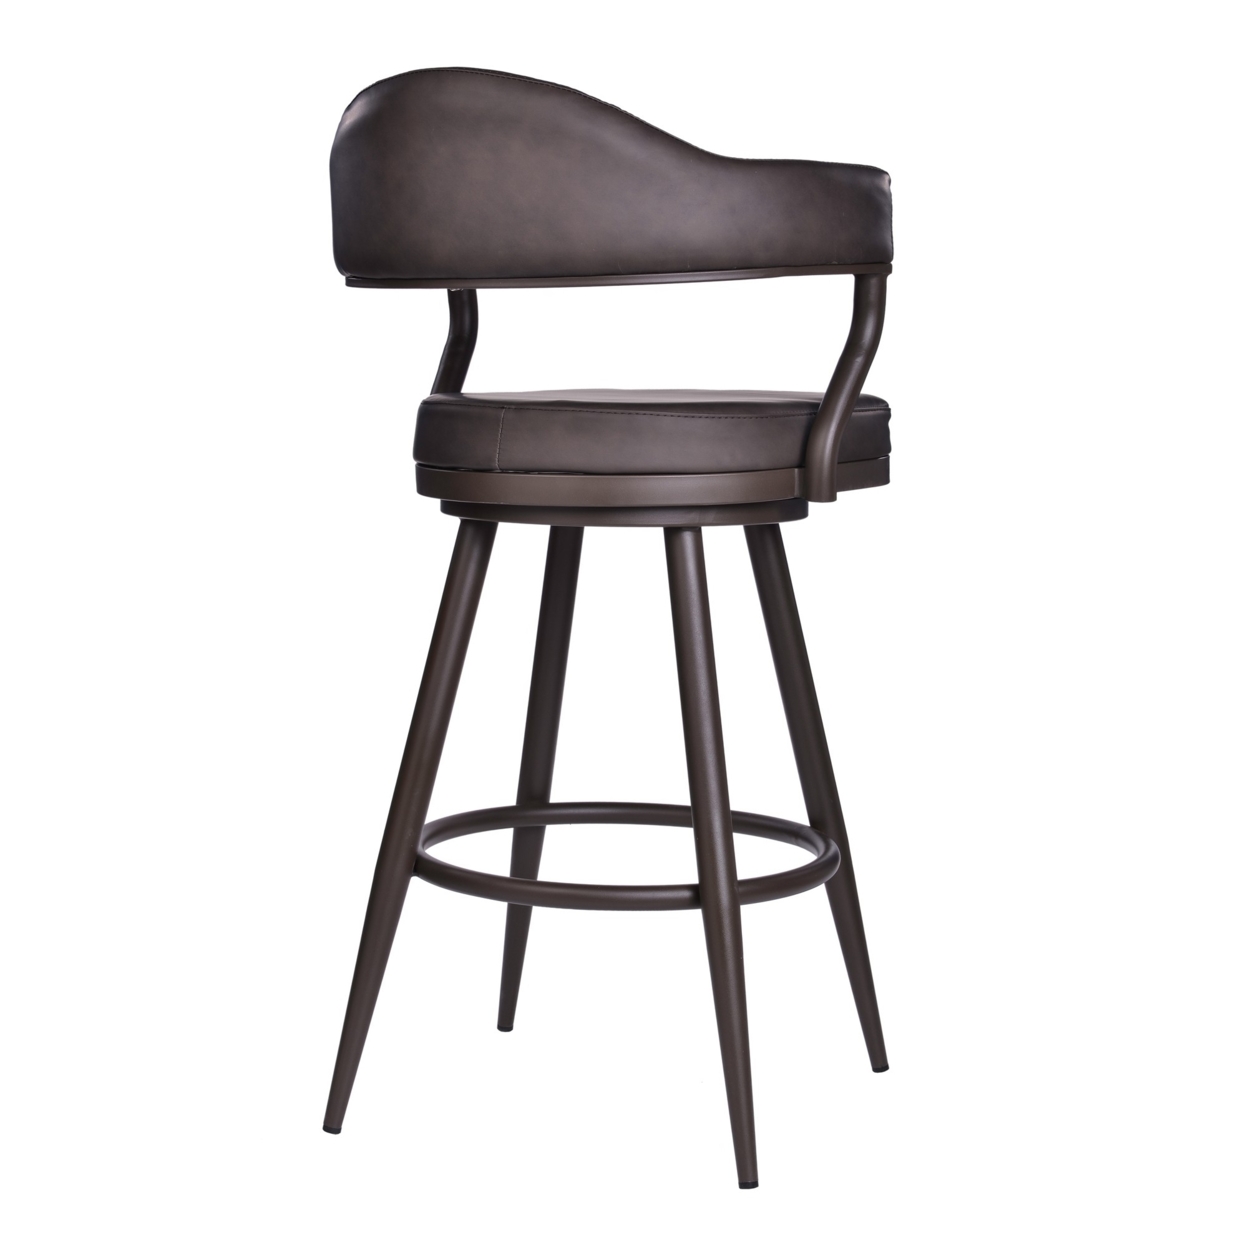 Faux Leather Barstool With Open Camelback Design, Brown- Saltoro Sherpi